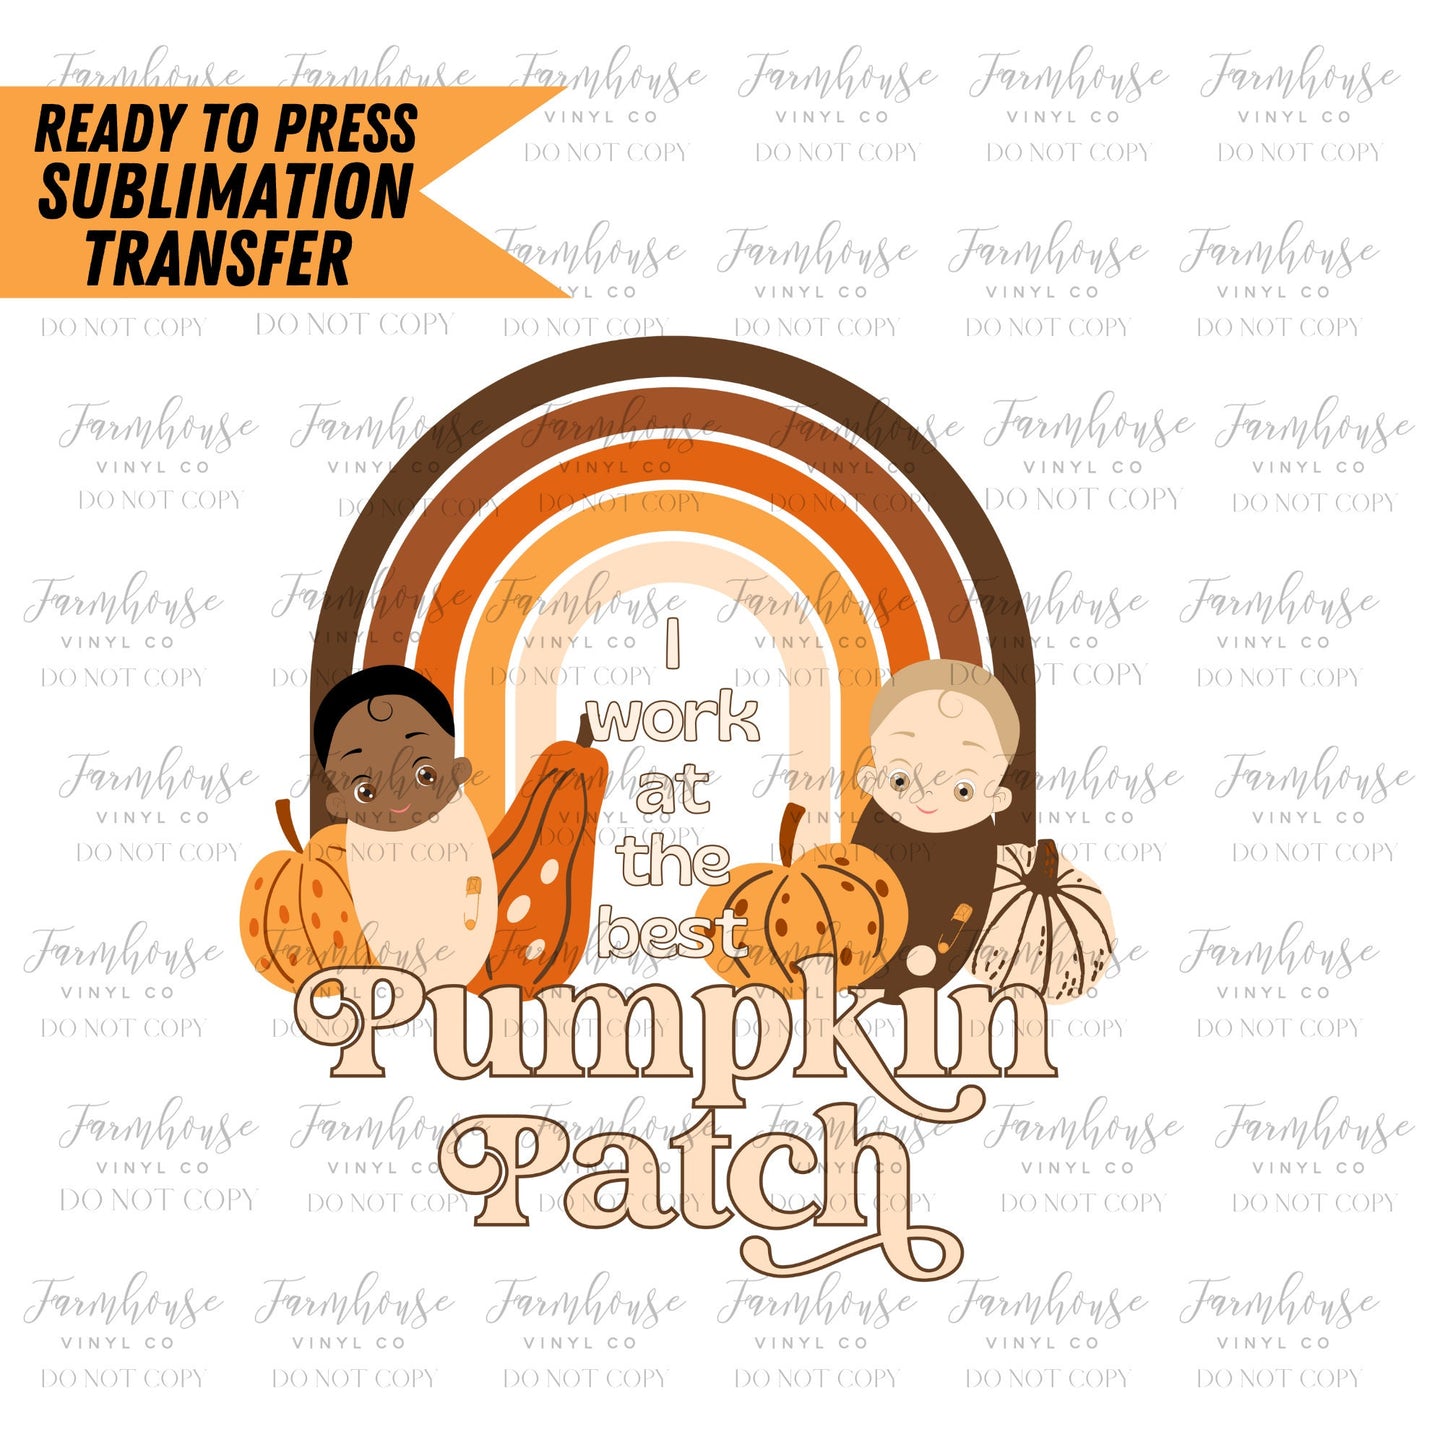 I Work At the Best Pumpkin Patch, Ready To Press Sublimation Transfers, Halloween Design, Labor Delivery Nurse Fall, OB GYN Fall Design - Farmhouse Vinyl Co